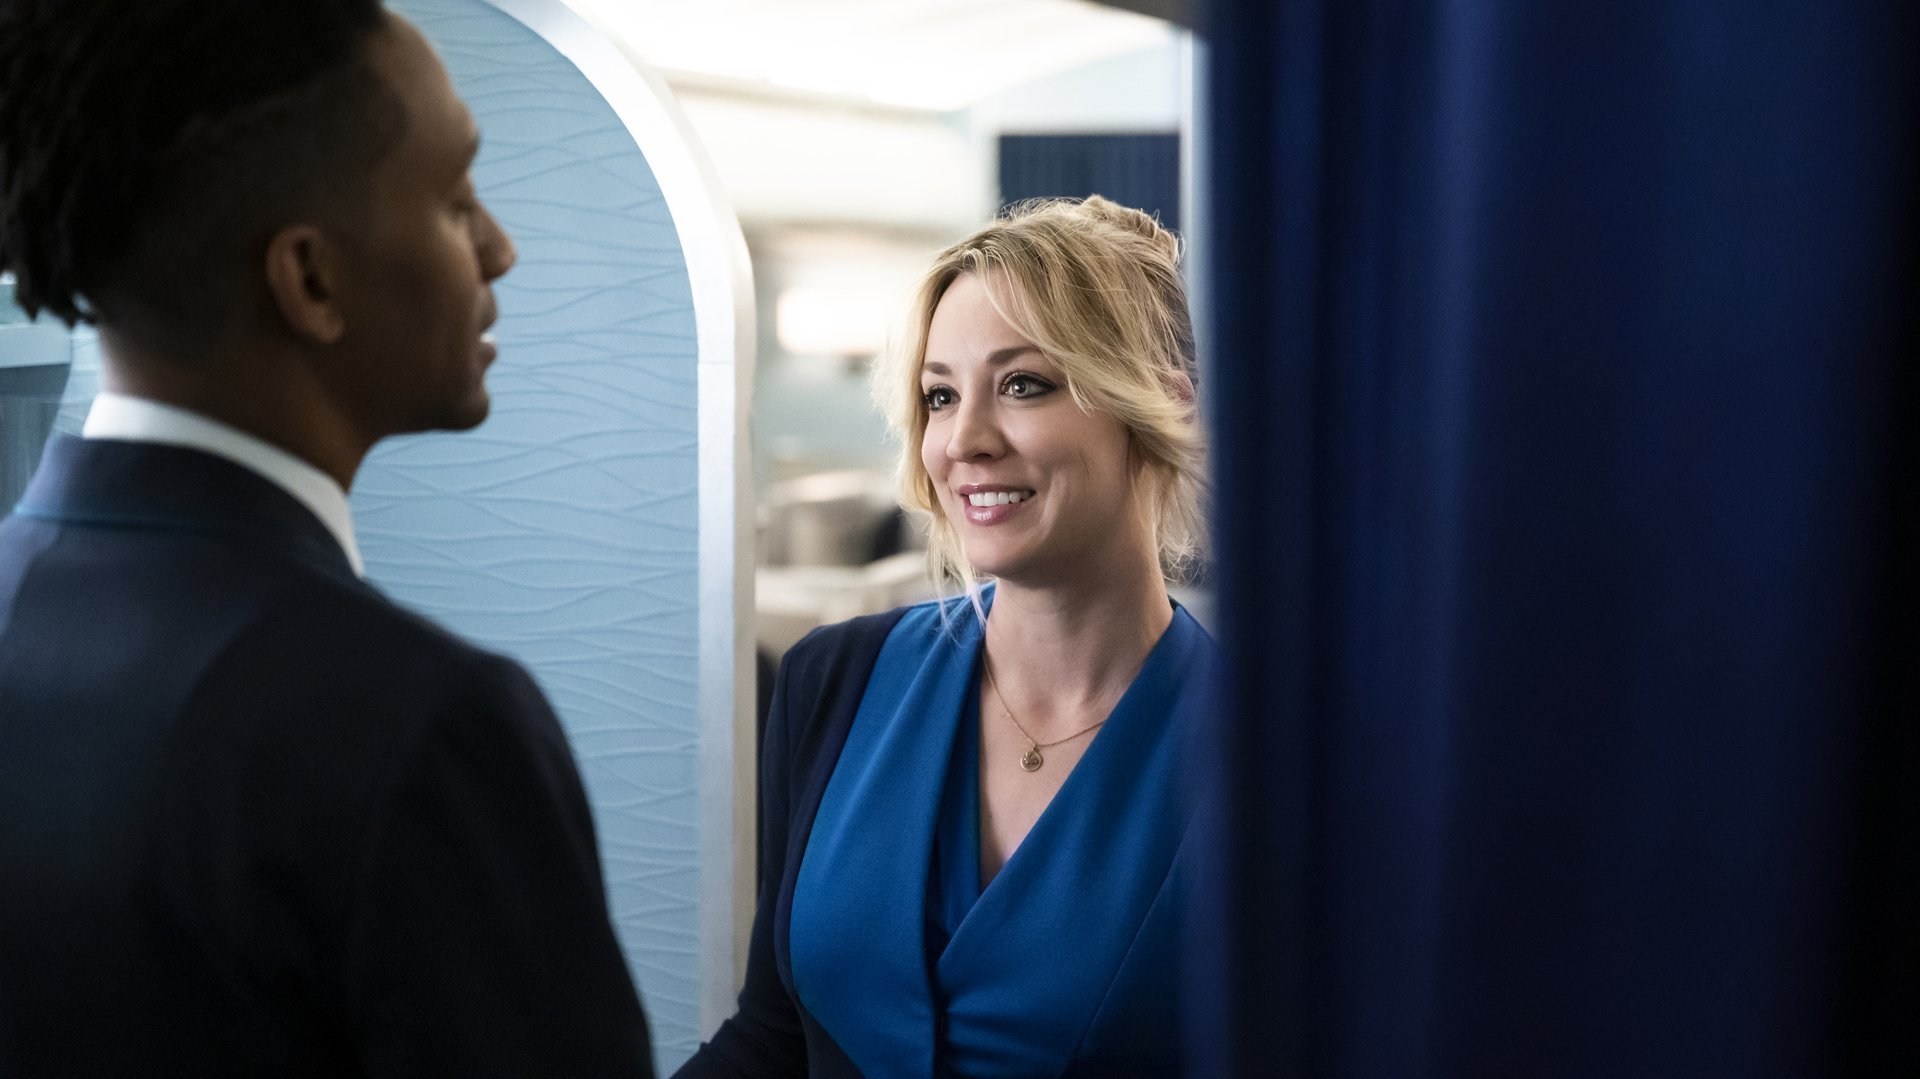 Kaley Cuoco and The Flight Attendant’s Critics’ Choice Awards nominations are perfect ode to late dog